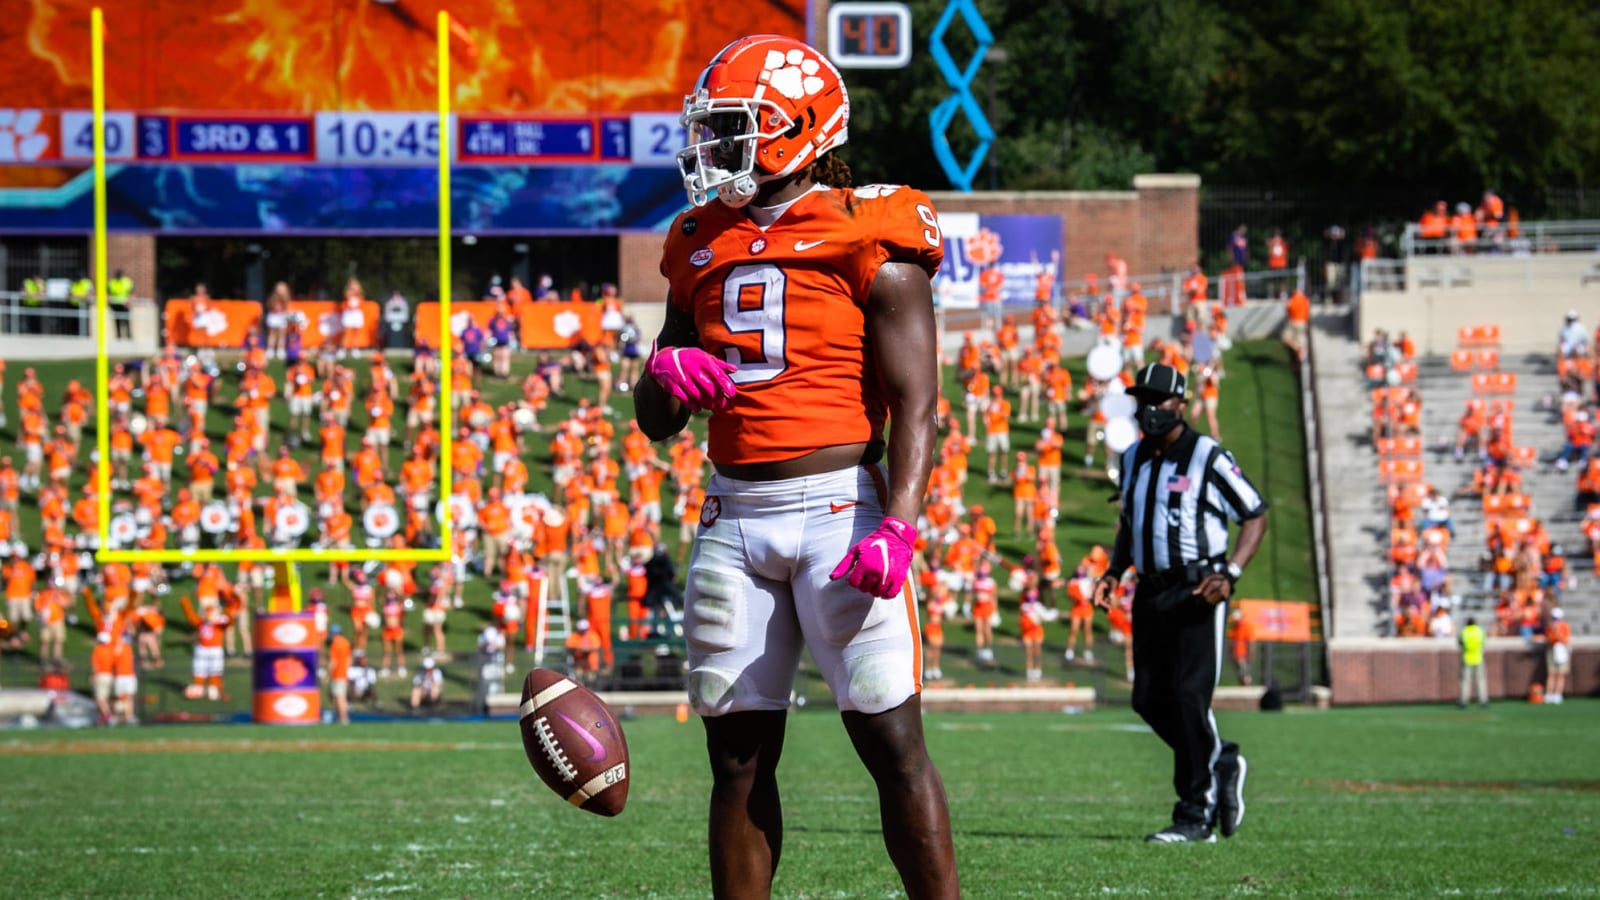 Travis Etienne plans to beef up his breakfast after enduring cramps